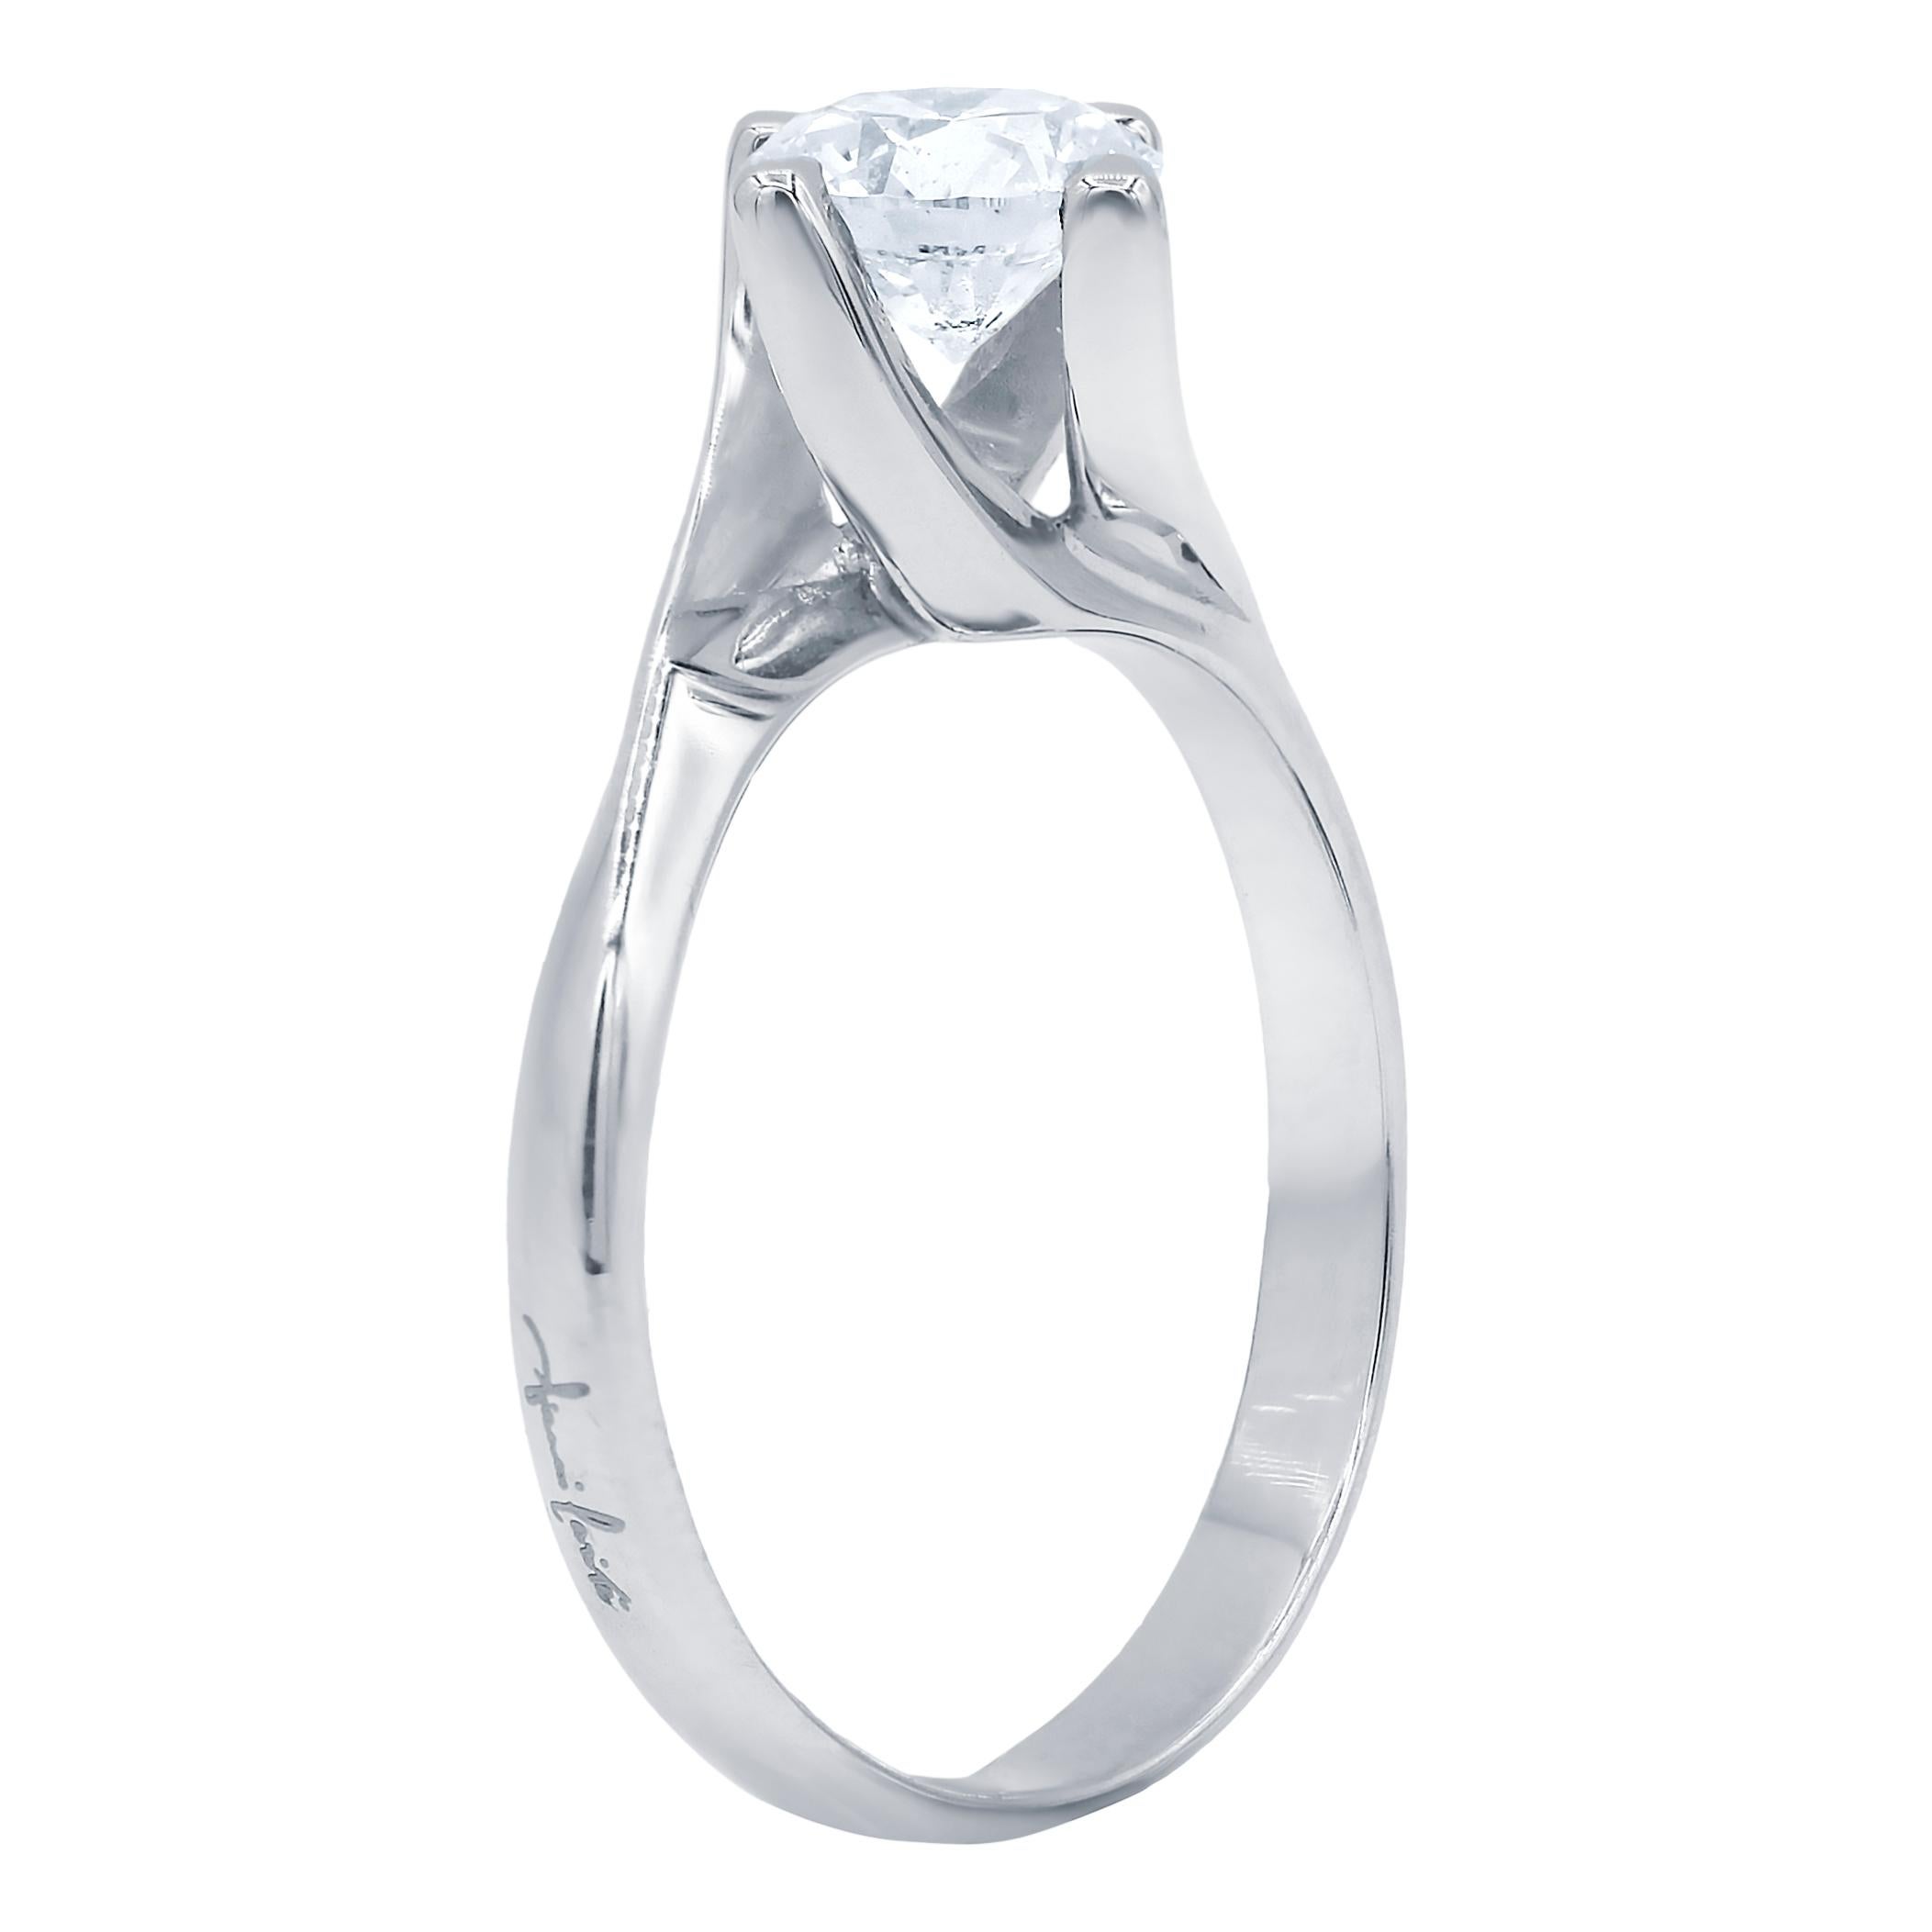 Round Cut 18kt White Gold Diamond Engagement Ring with 1.01ct Round Diamond For Sale